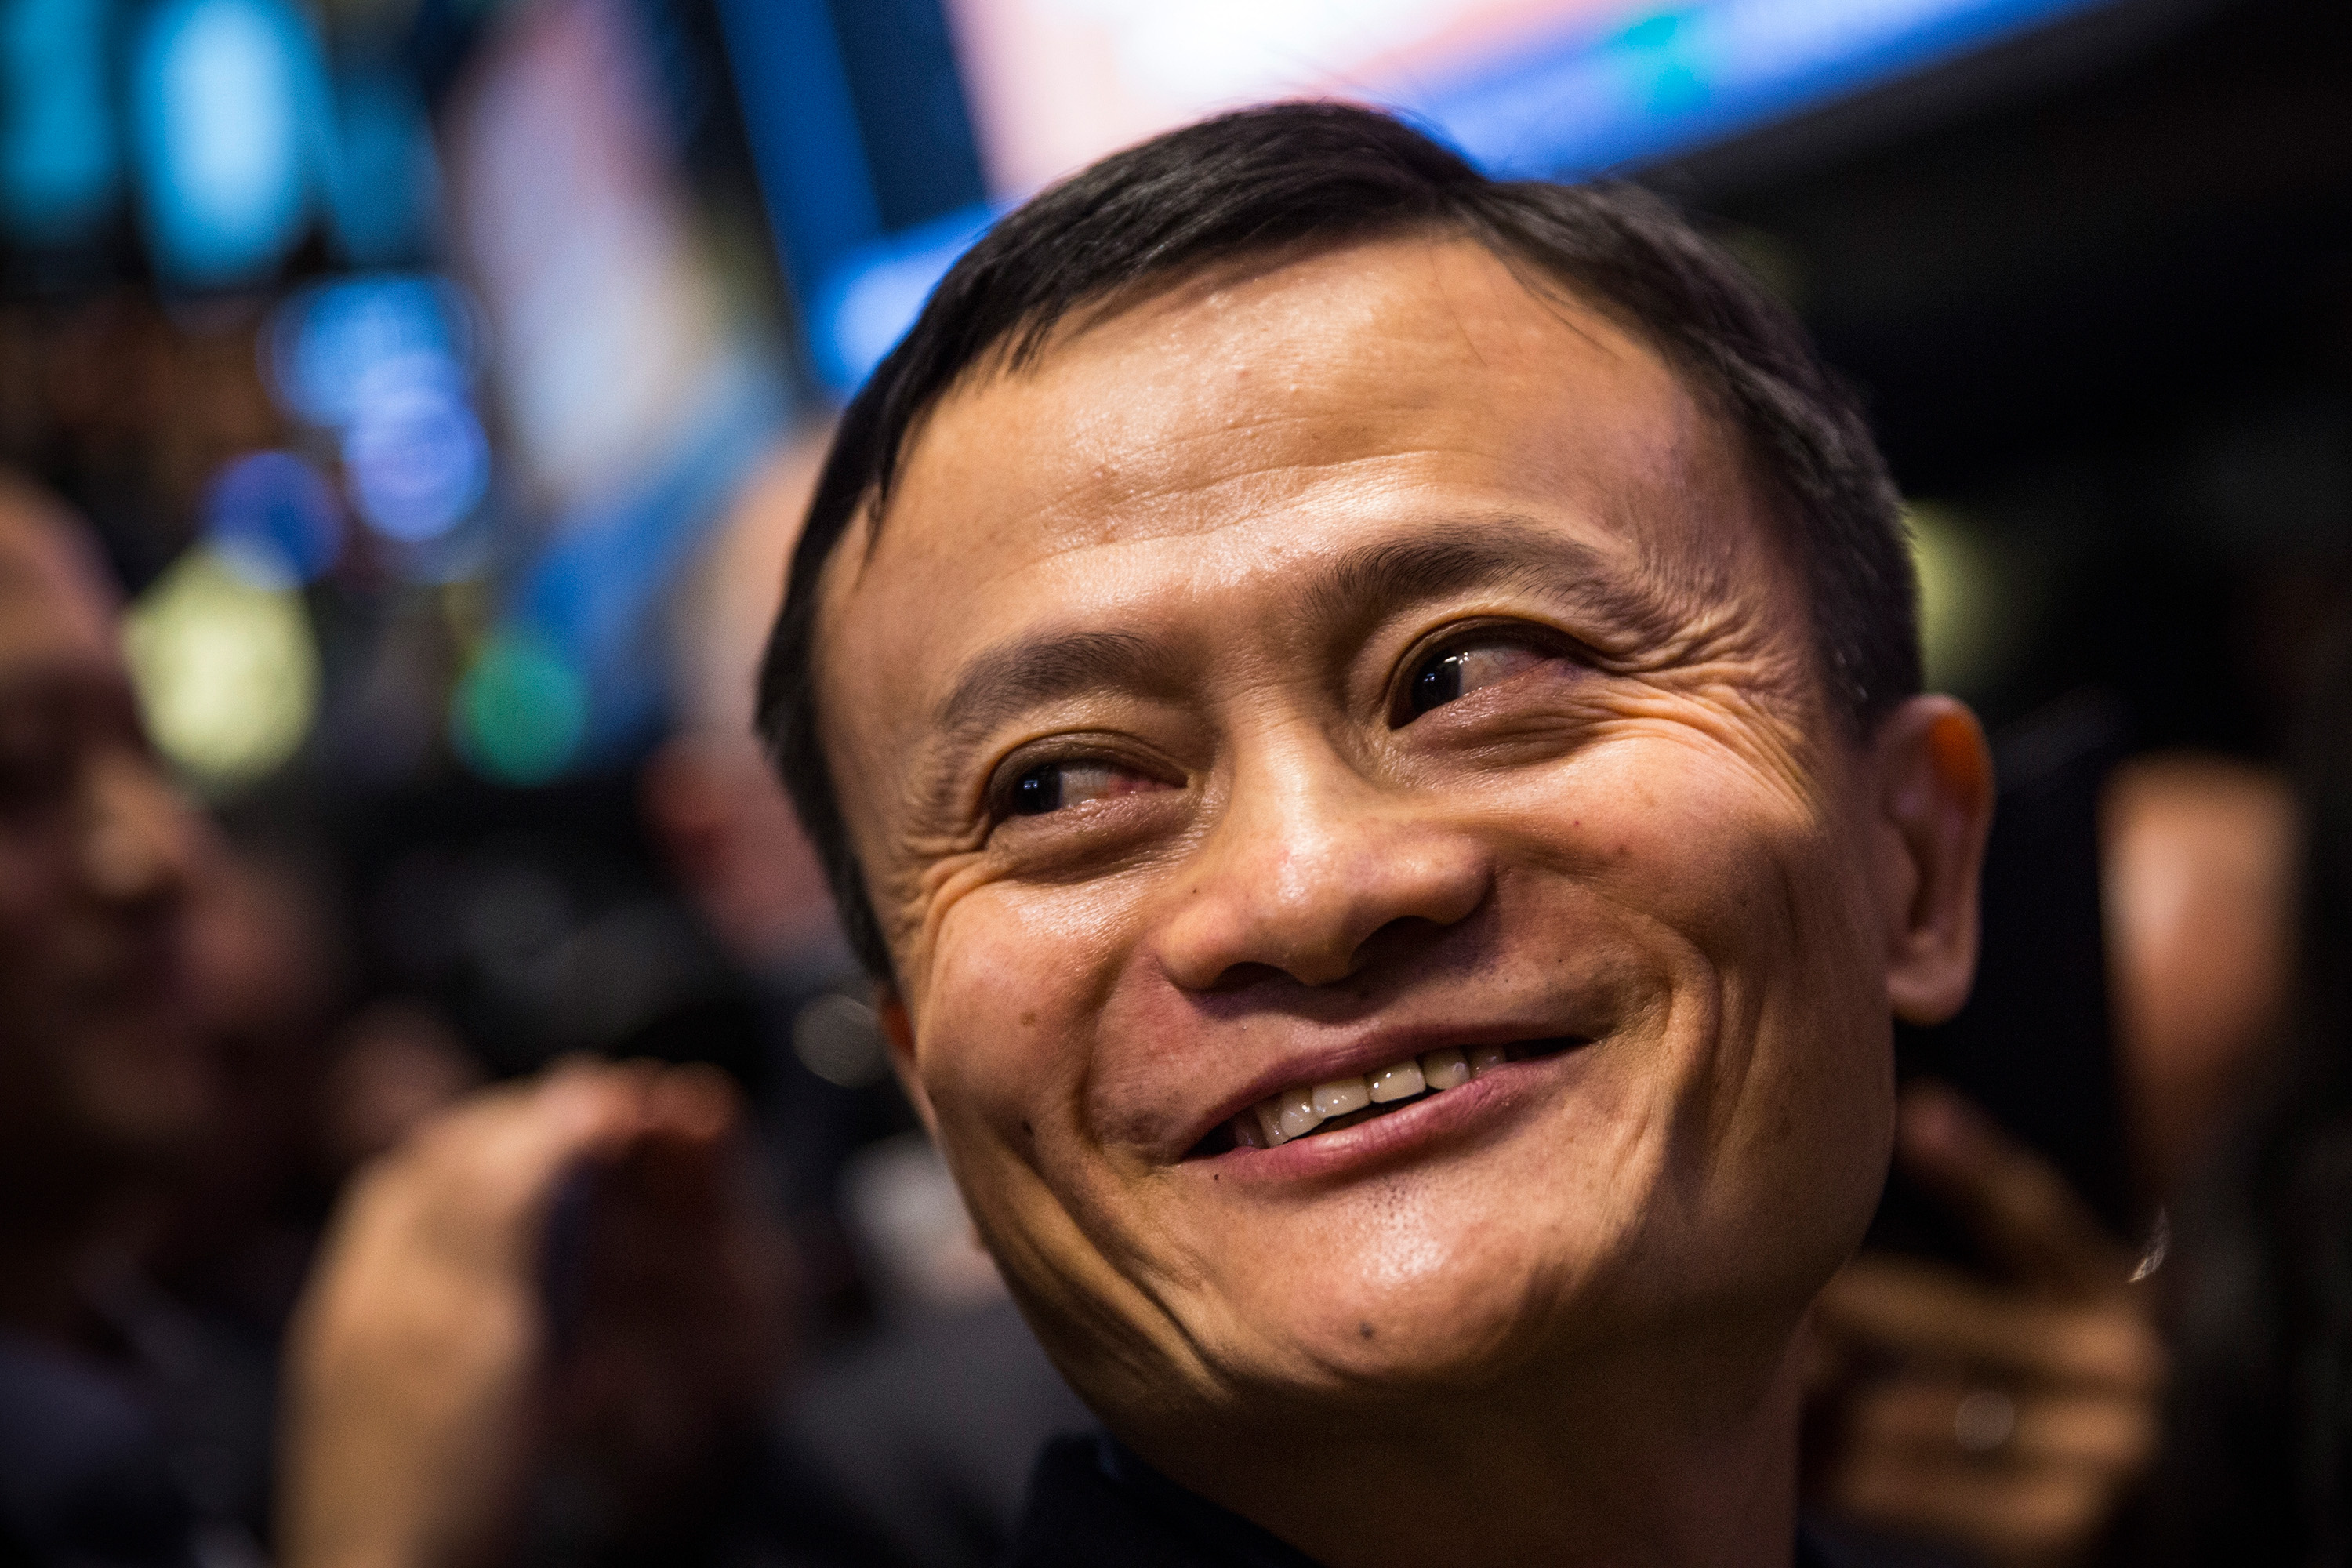 Founder and Executive Chairman of Alibaba Group Jack Ma attends the company's initial price offering (IPO) at the New York Stock Exchange on September 19, 2014 in New York City. (Andrew Burton&mdash;Getty Images)